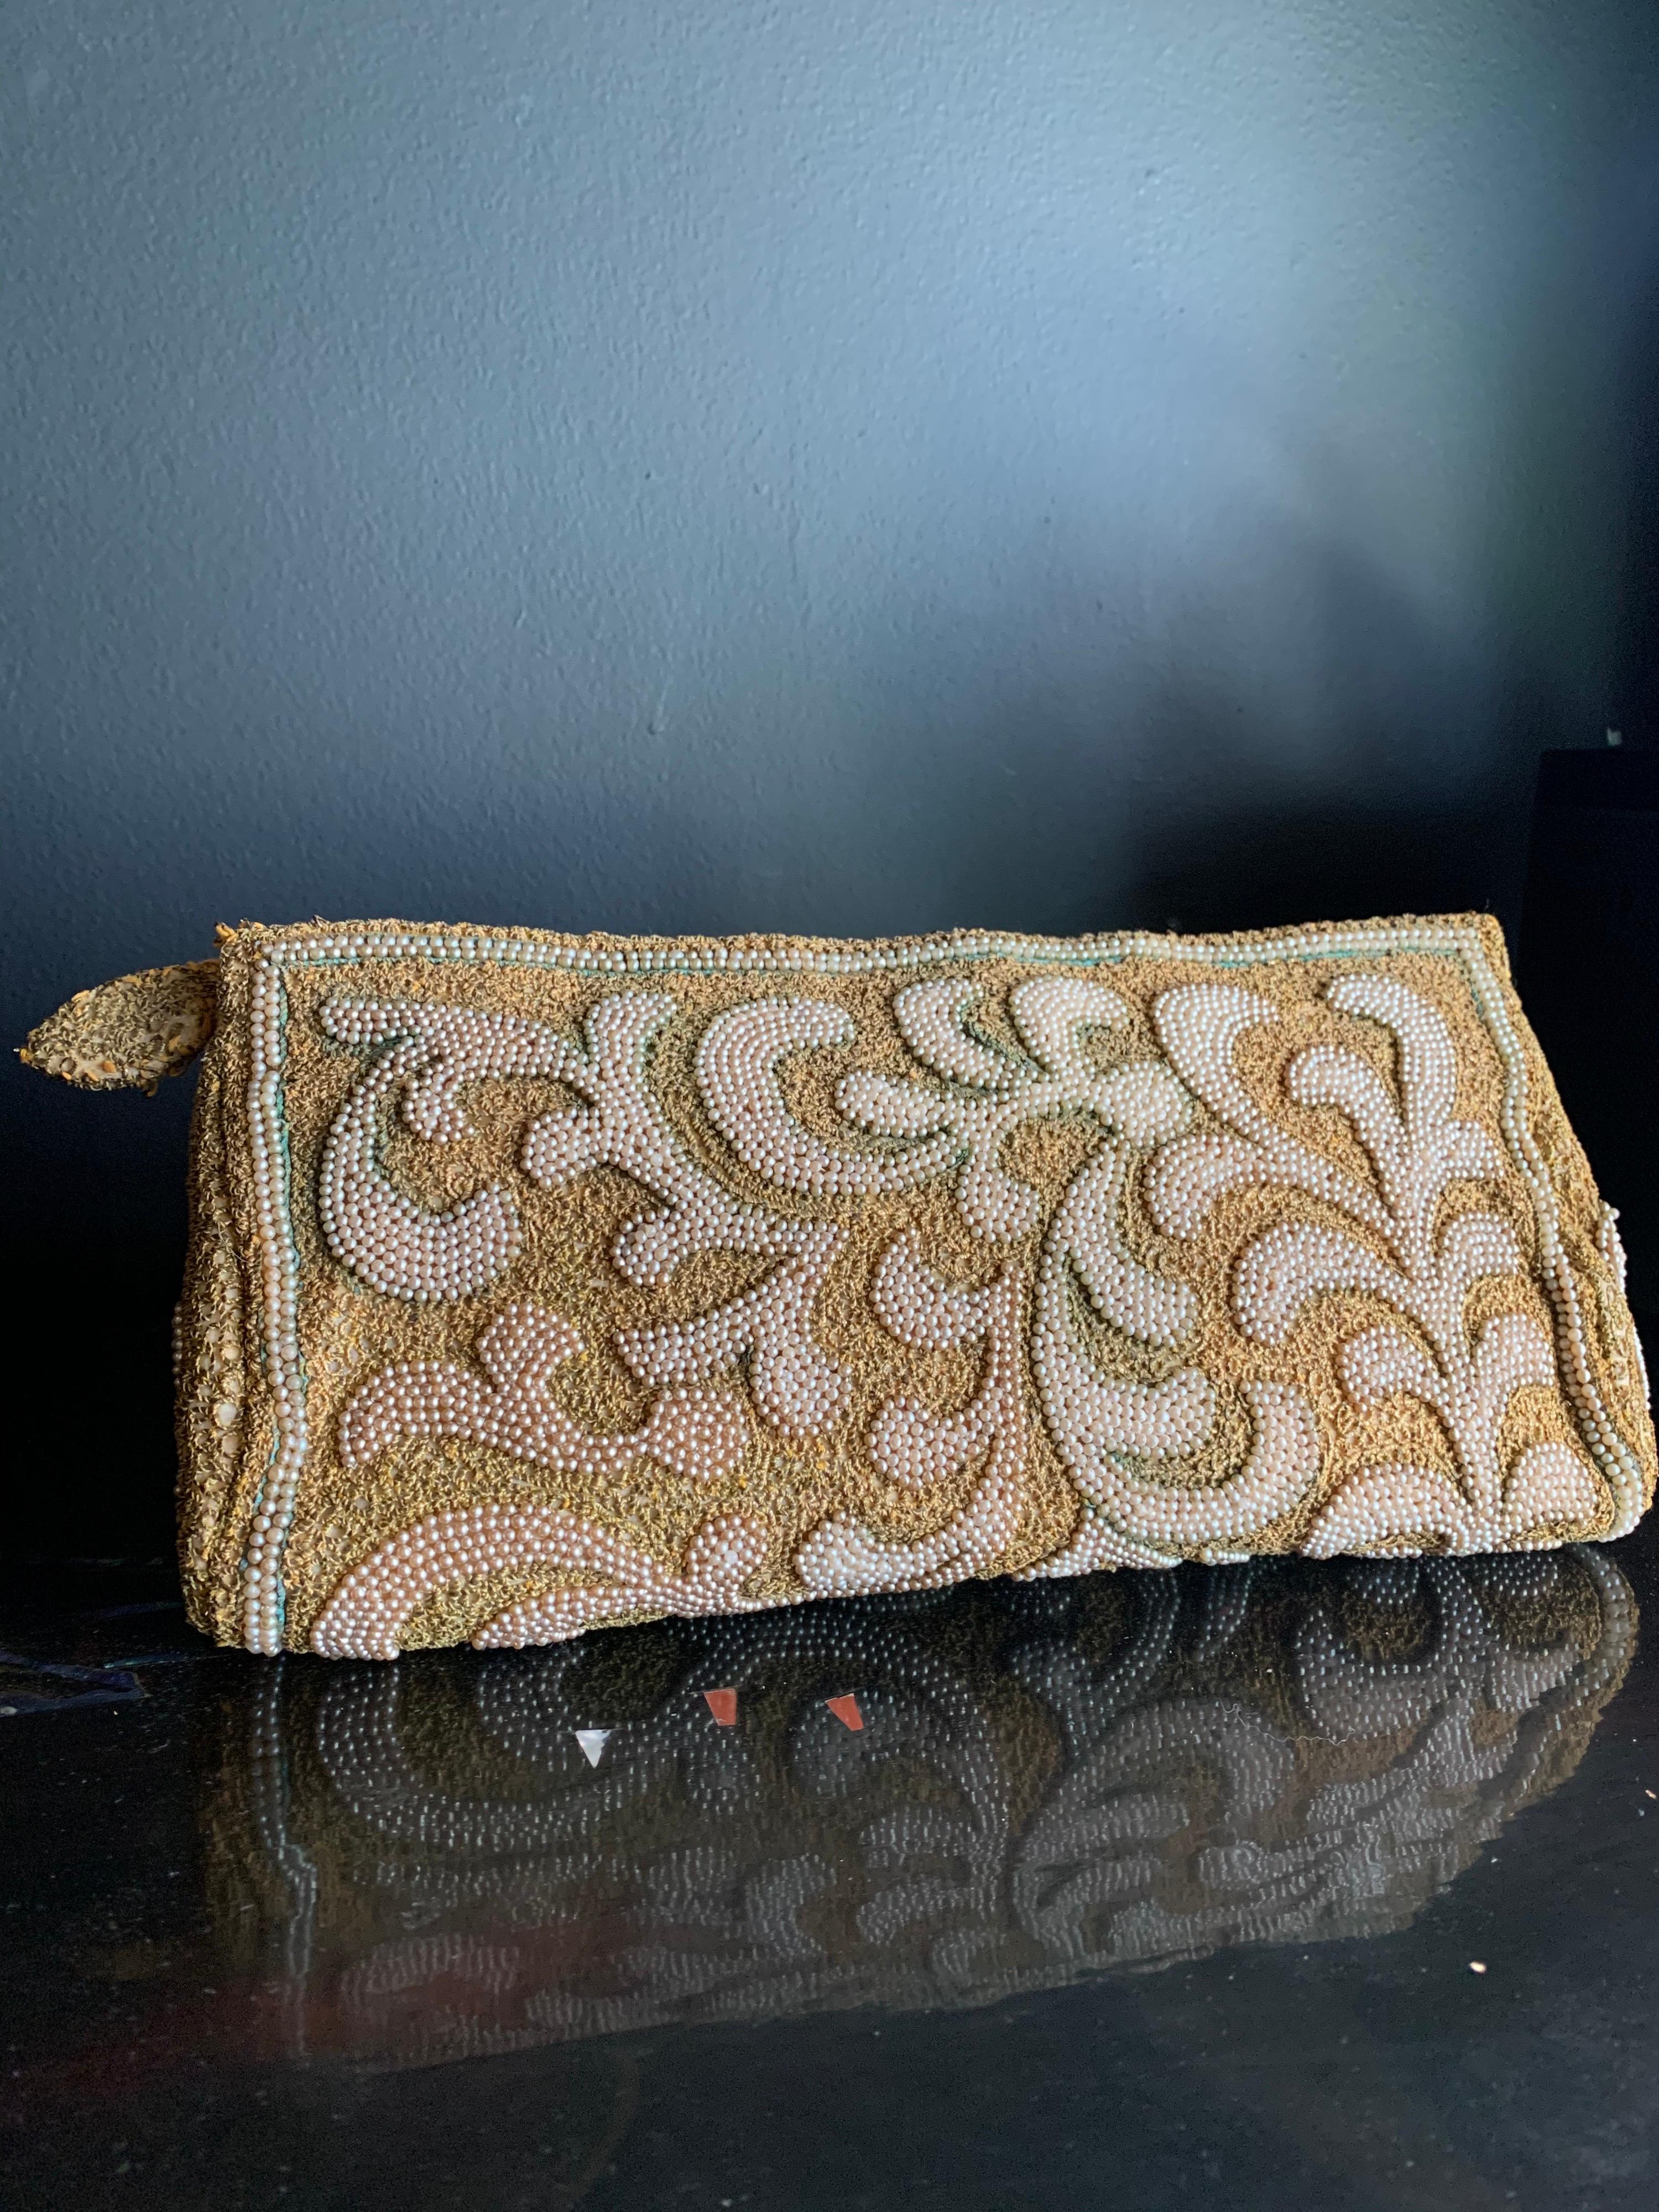 A stunning 1950s Harry Rosenfeld gold filigree lace and faux pearl embroidered evening clutch with embroidered zipper pull. Excellent, clean ivory satin lining with original, chain-tethered coin purse. Some small areas of verdigris on exterior add